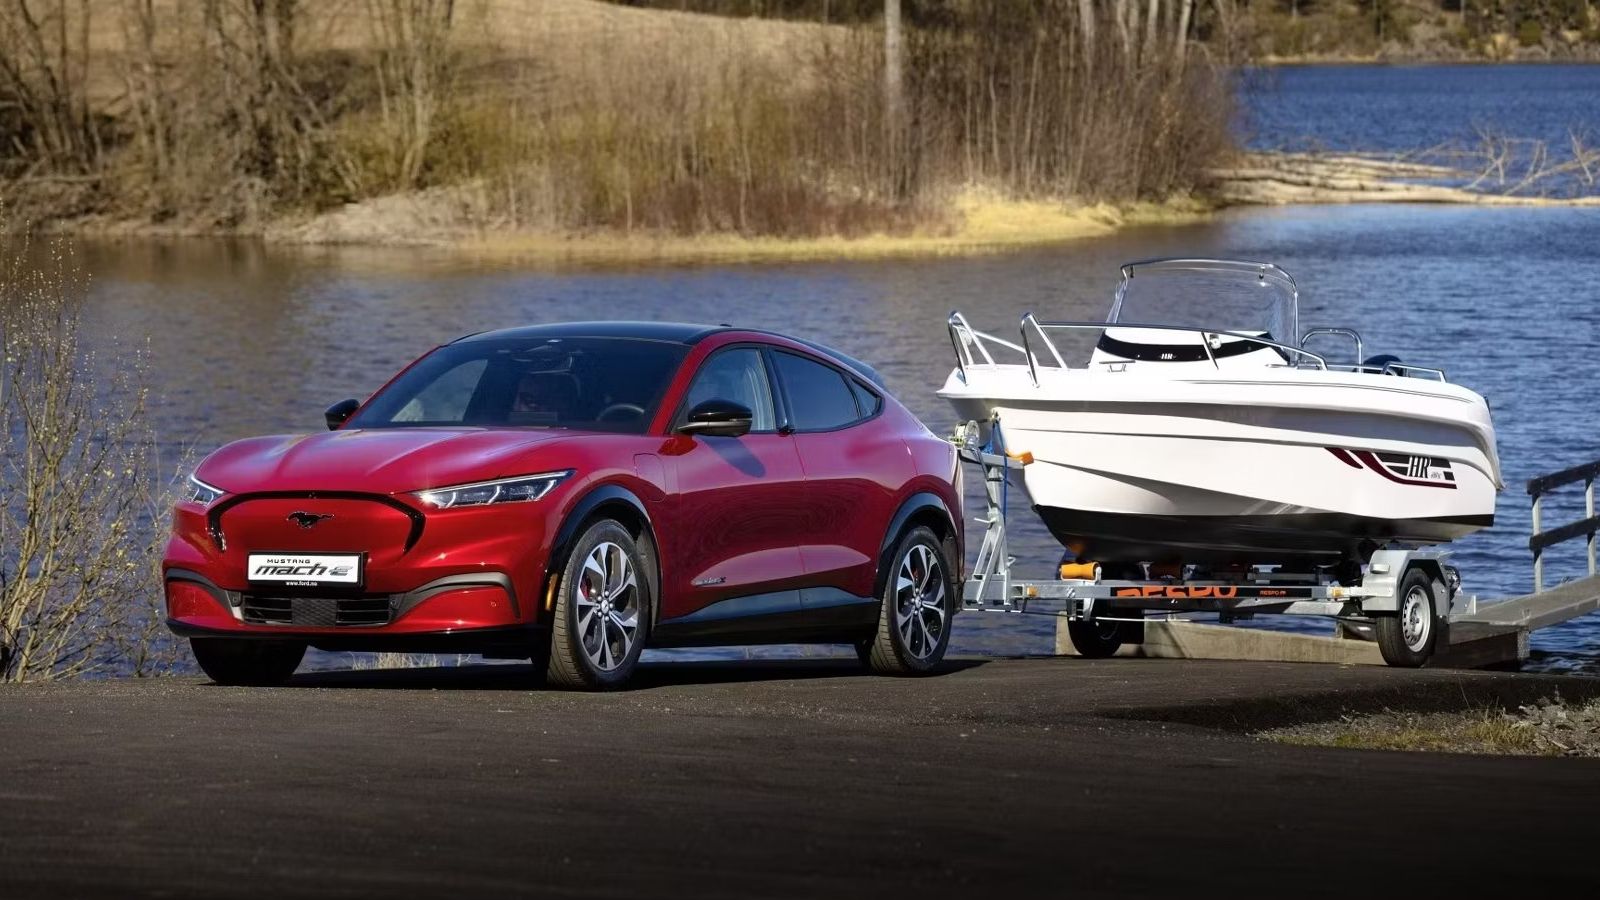 2023 Ford Mustang Mach-E towing a boat